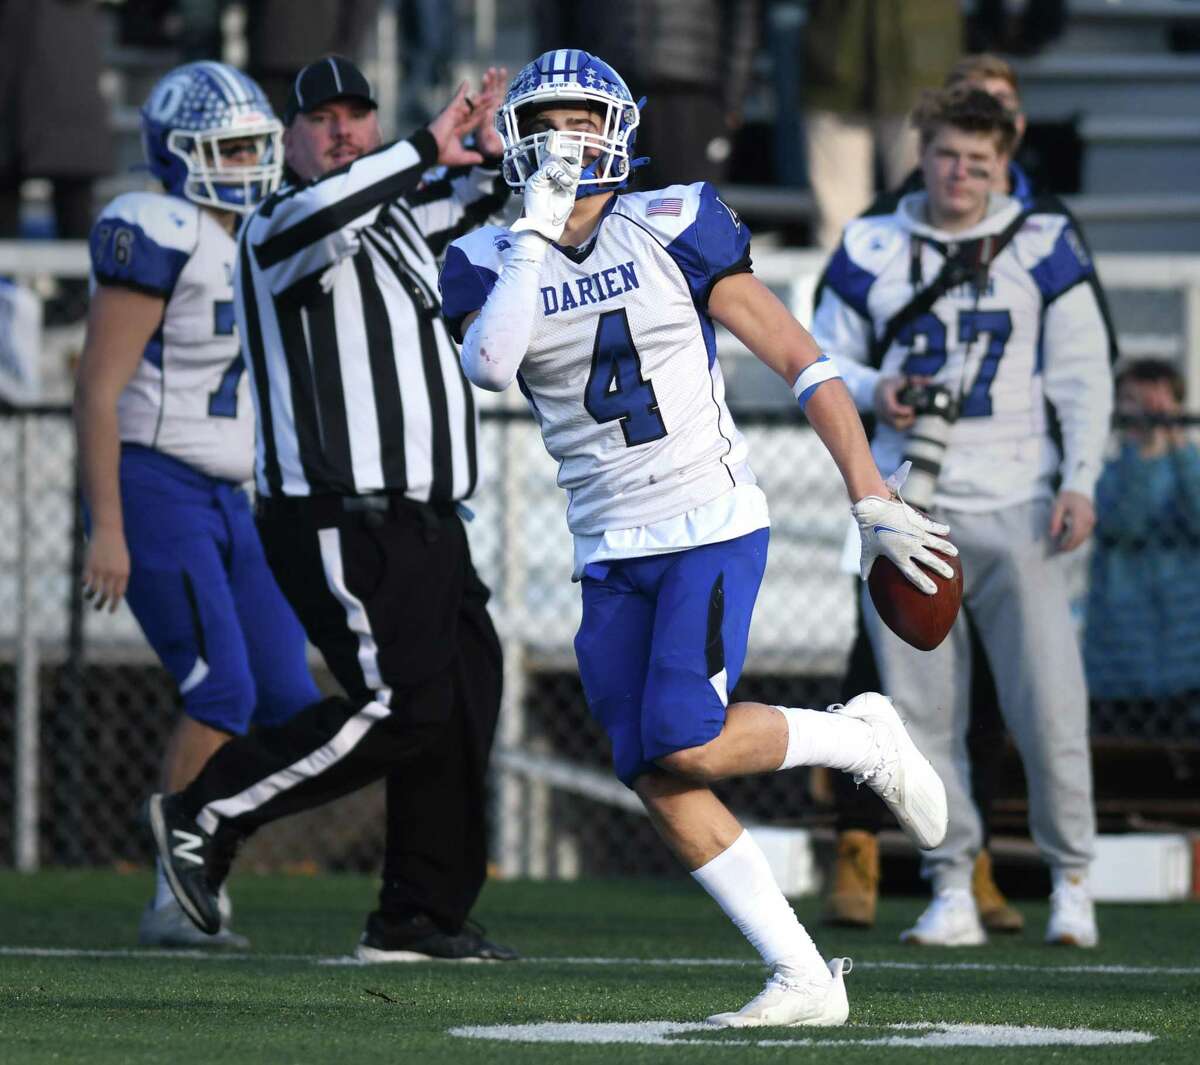 Darien defensive back Joe Cesare (4) celebrates after one of his three interceptions in No. 3 Darien's 24-10 win over No. 2 New Canaan in the CIAC Class LL high school football semifinal at New Canaan High School in New Canaan, Conn. Sunday, Dec. 5, 2021.